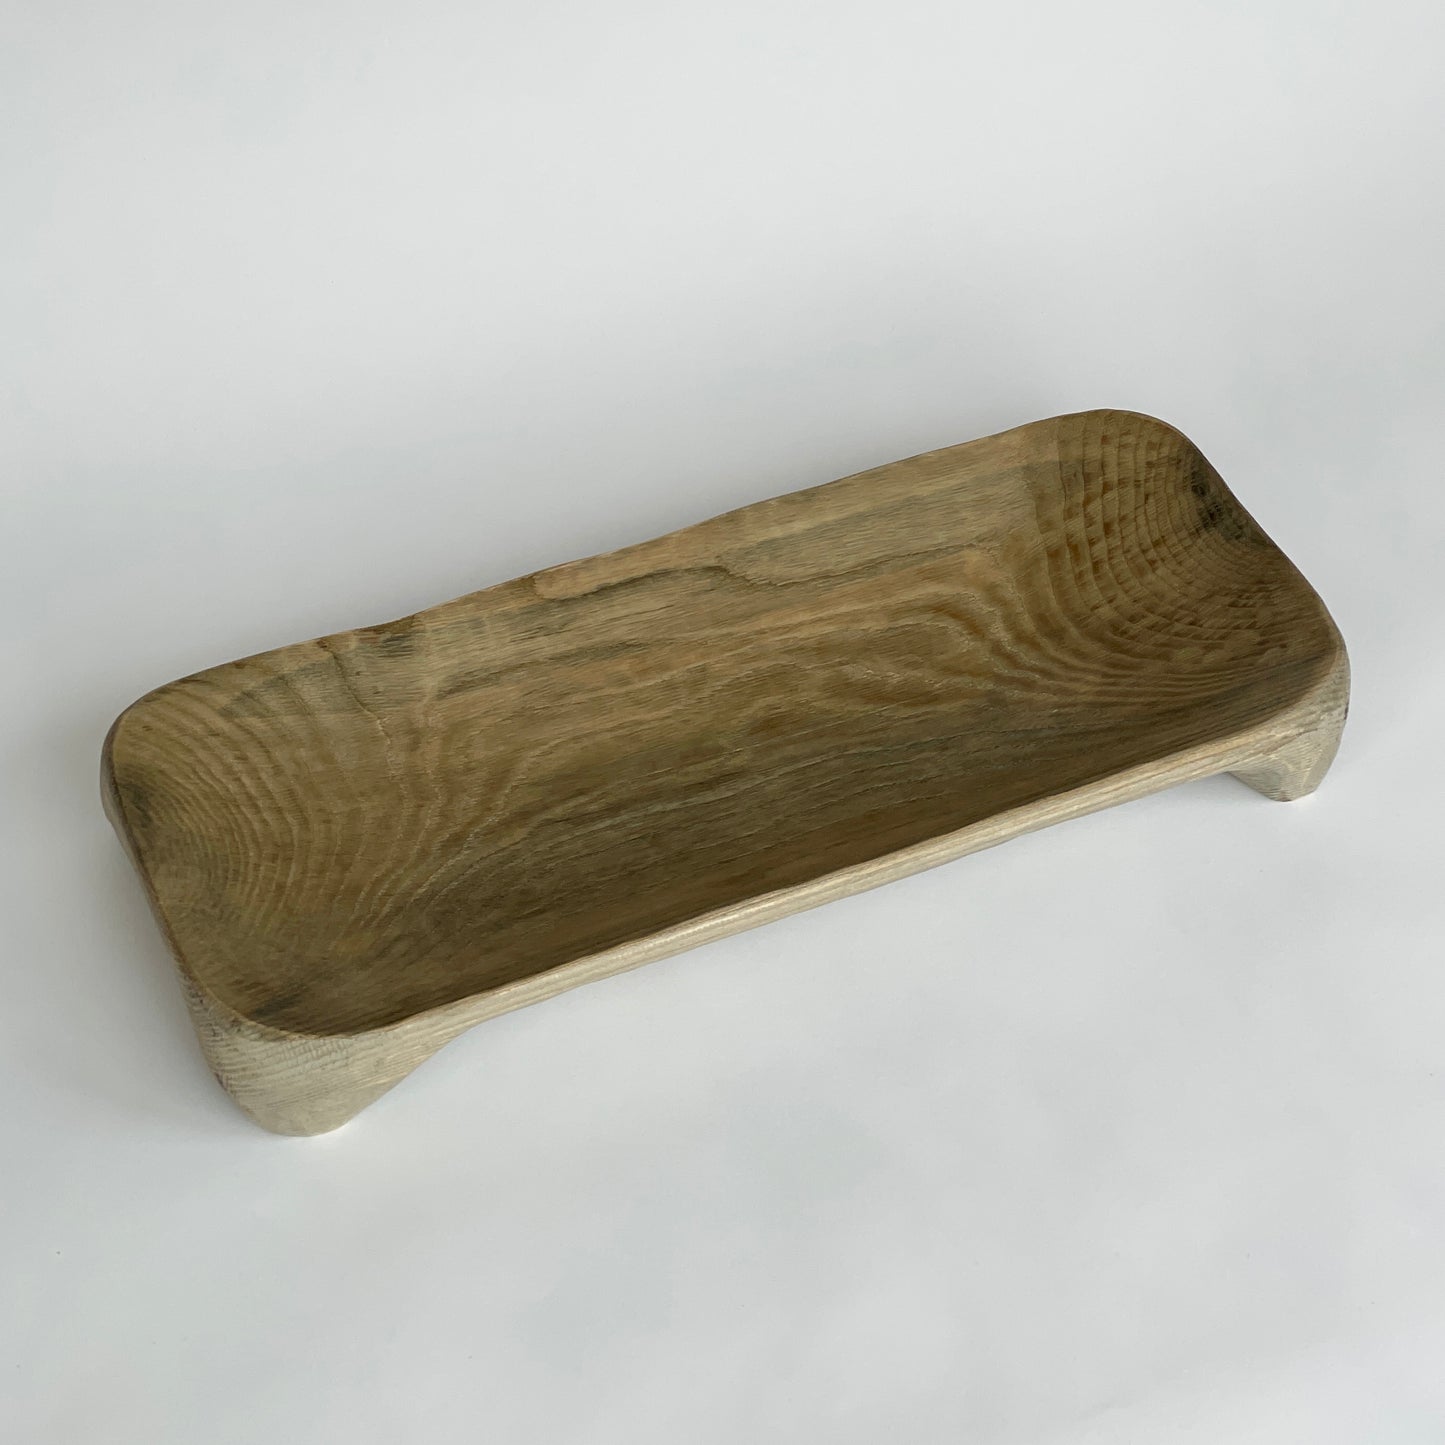 Carved Bread Dish